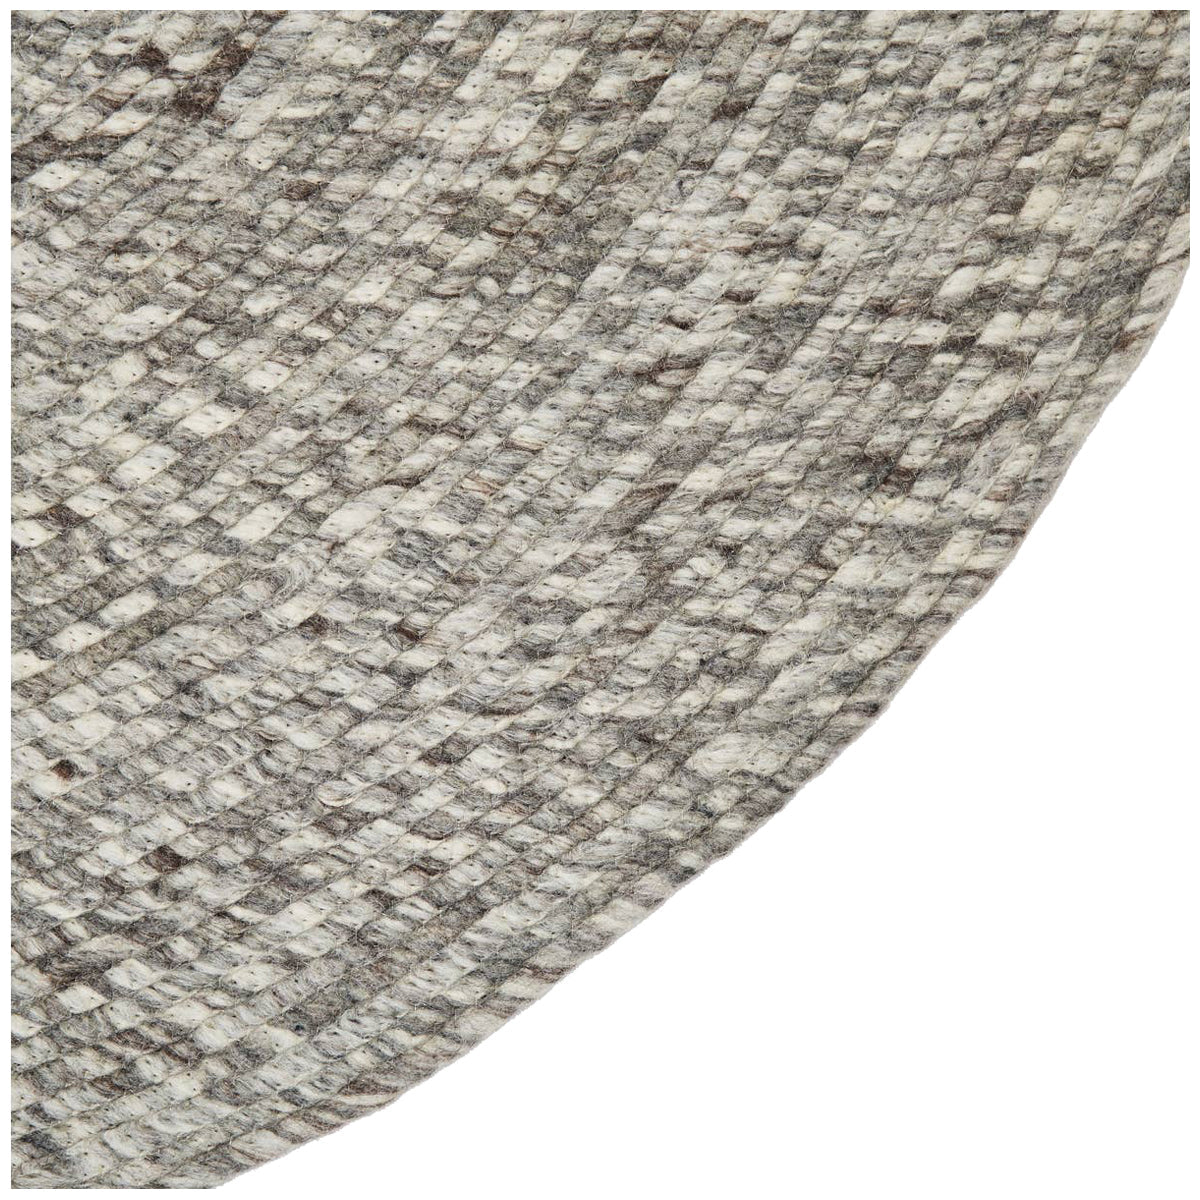 Jaipur Idriss Tenby Solid Gray White Round IDS02 Area Rug